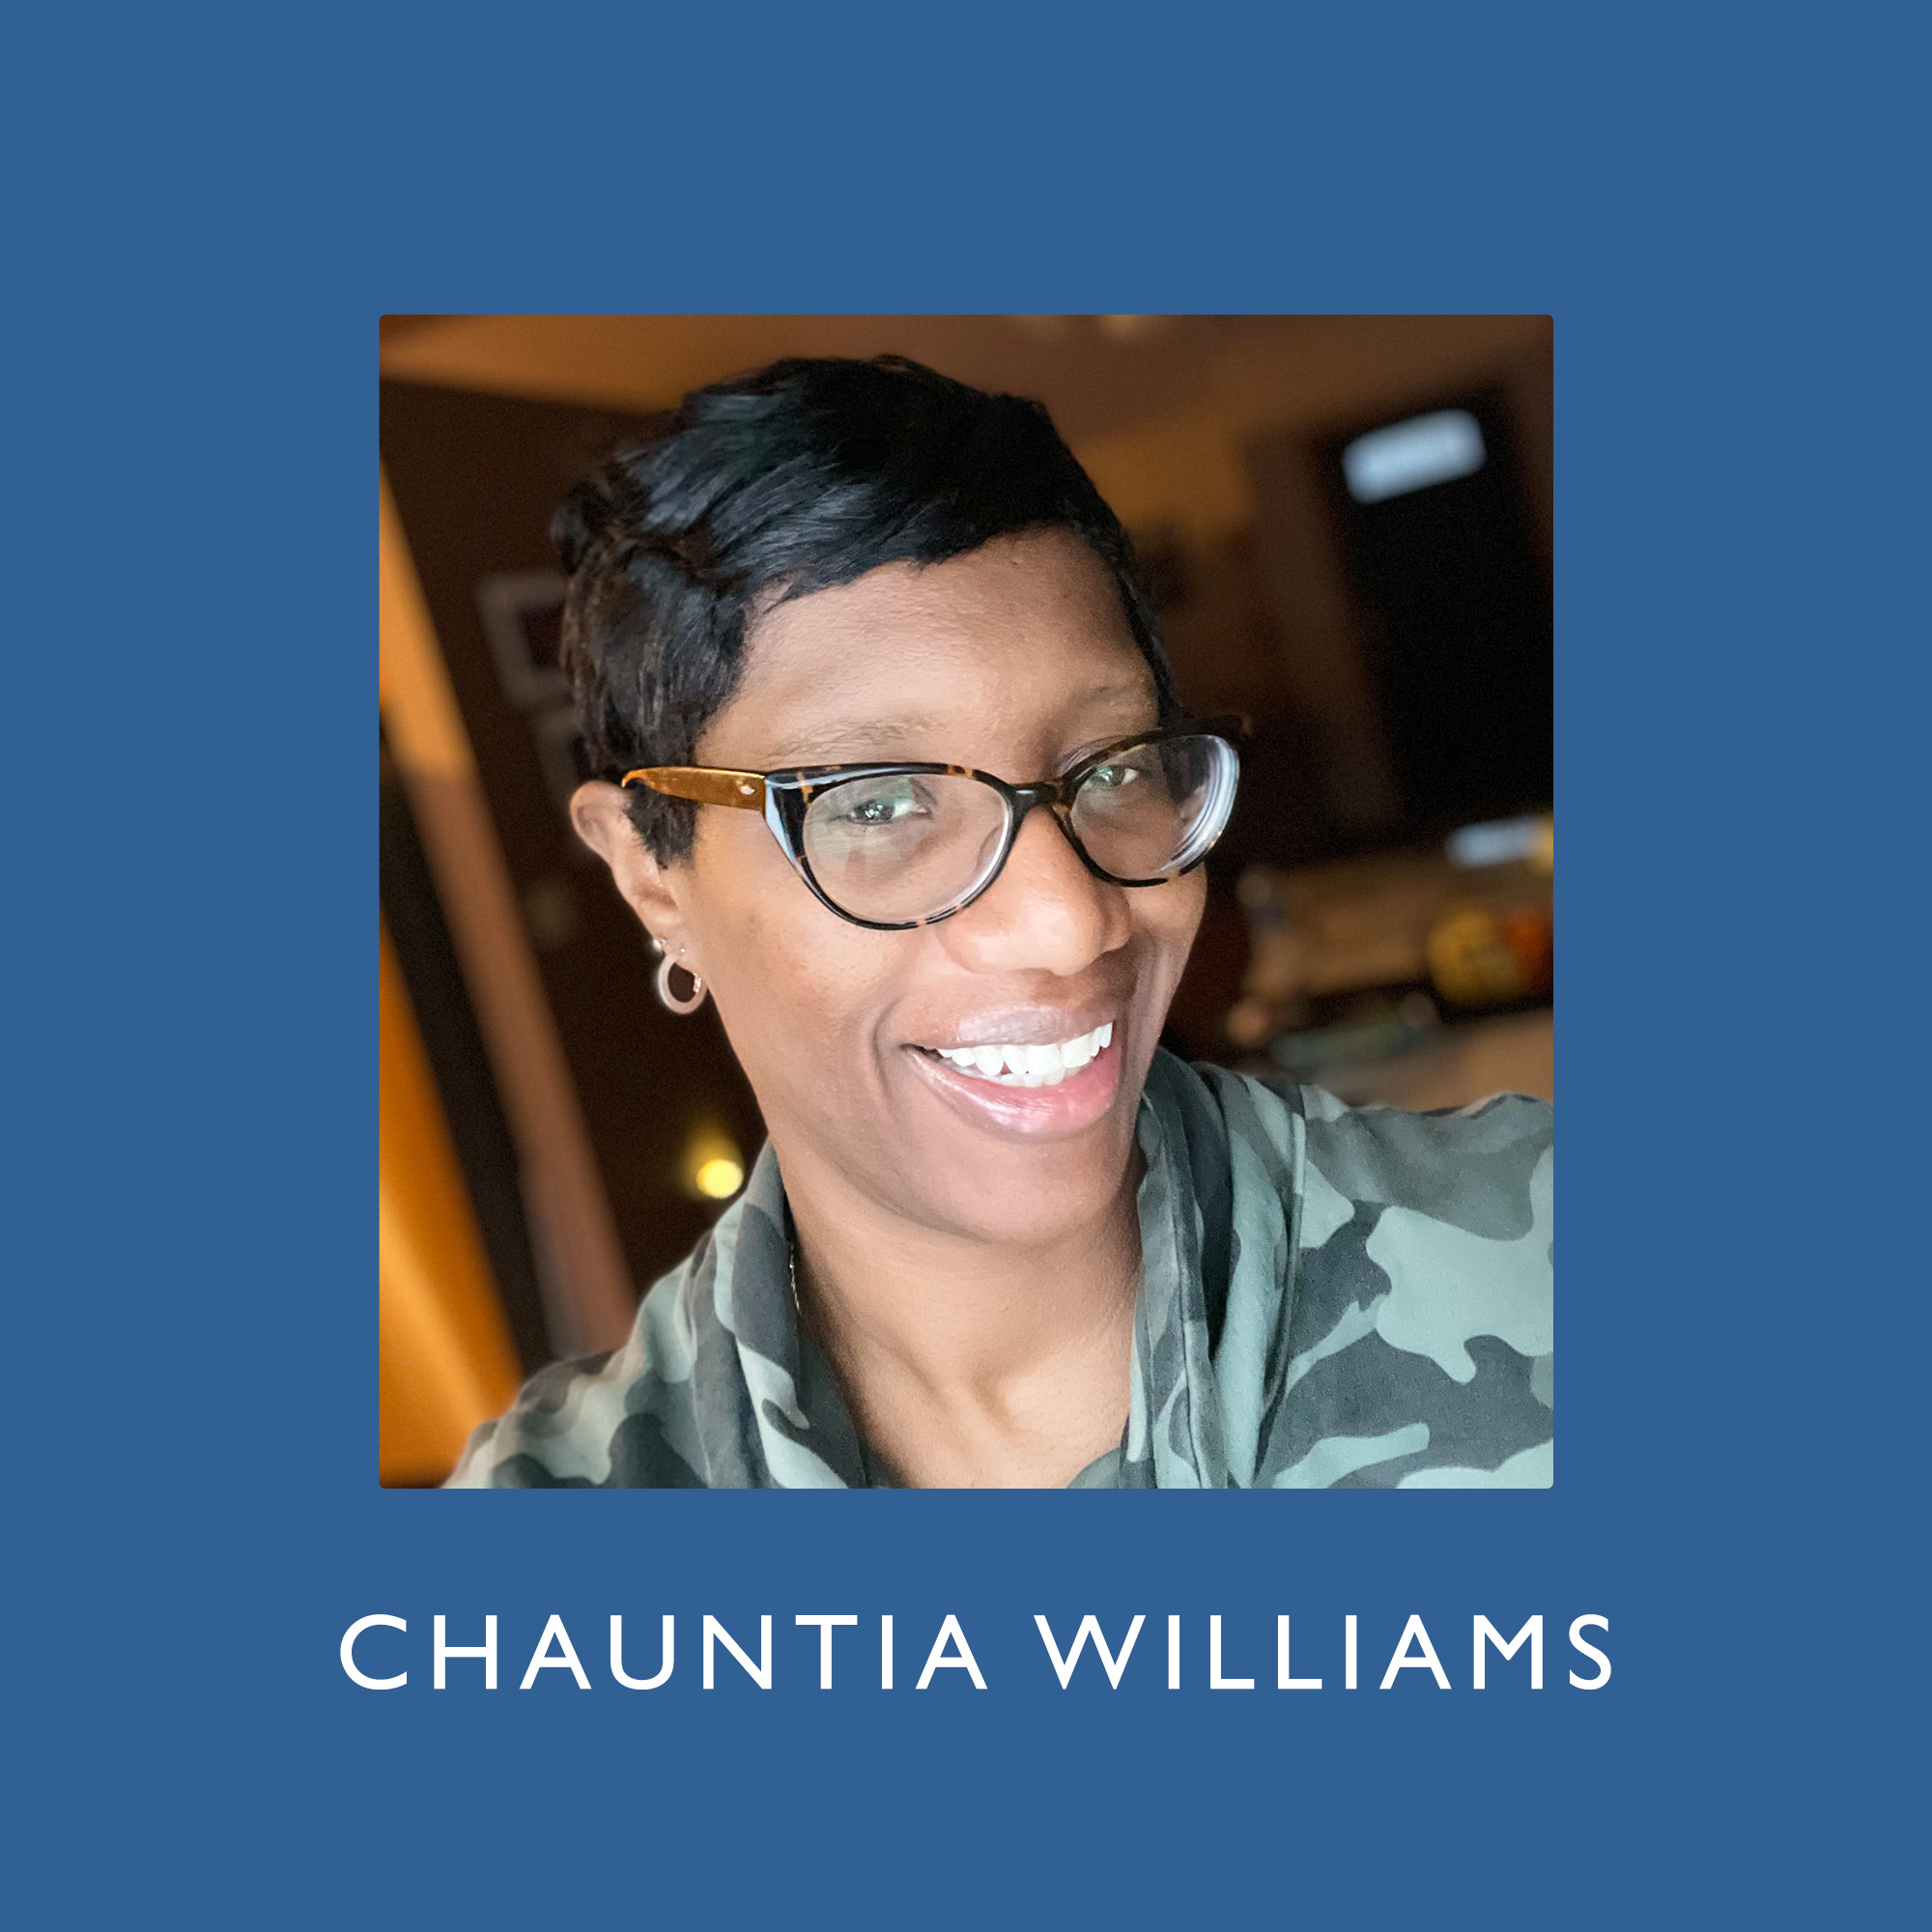 Chauntia Williams: Overcoming Fear, Loss, and Traumatic Nightmares